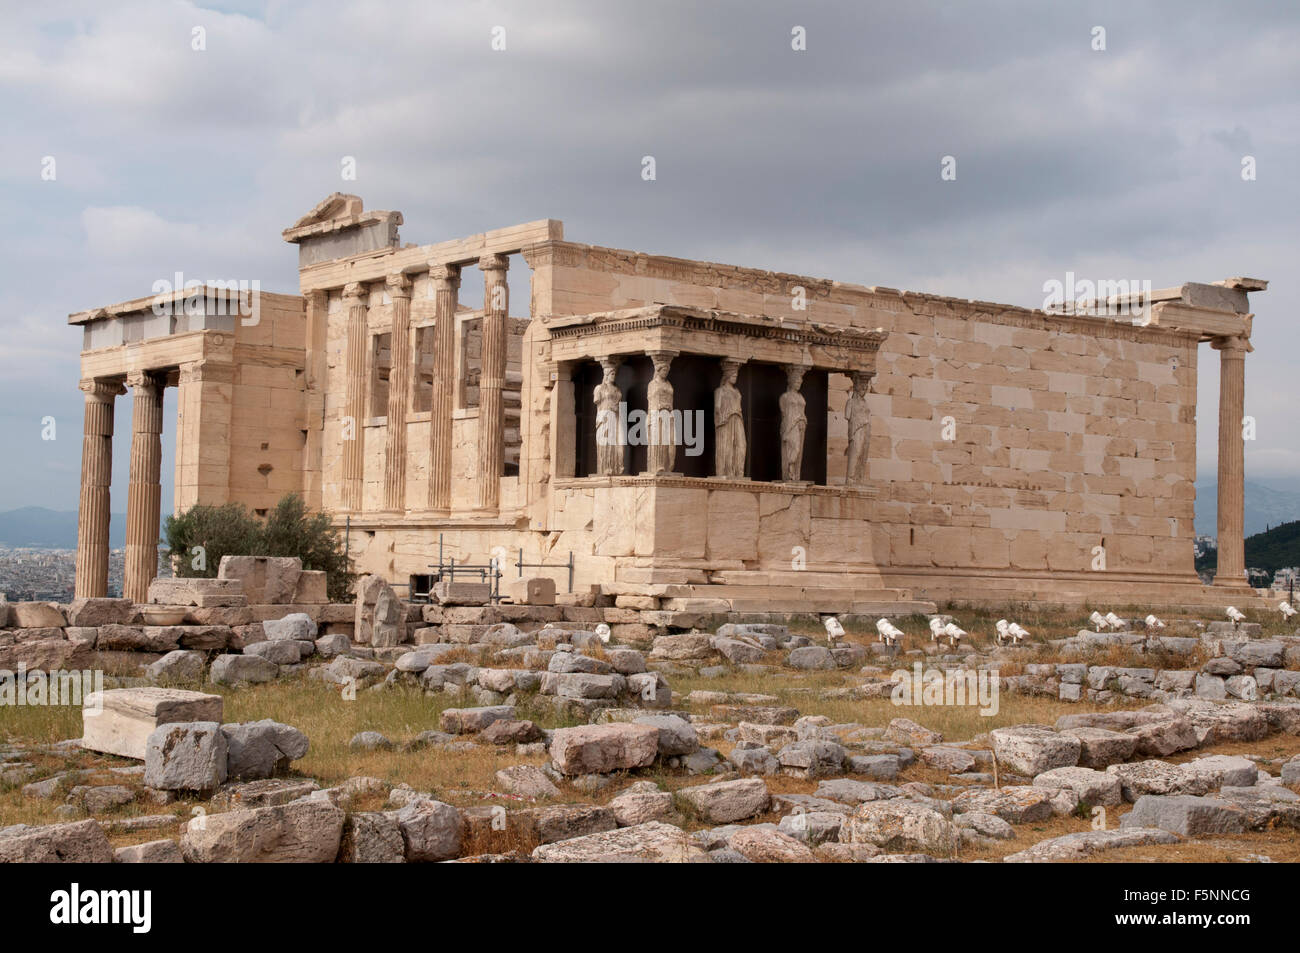 The Erechtheion is an ancient Greek temple built between 421 and 406 BC on the north side of the Acropolis of Athens. Stock Photo